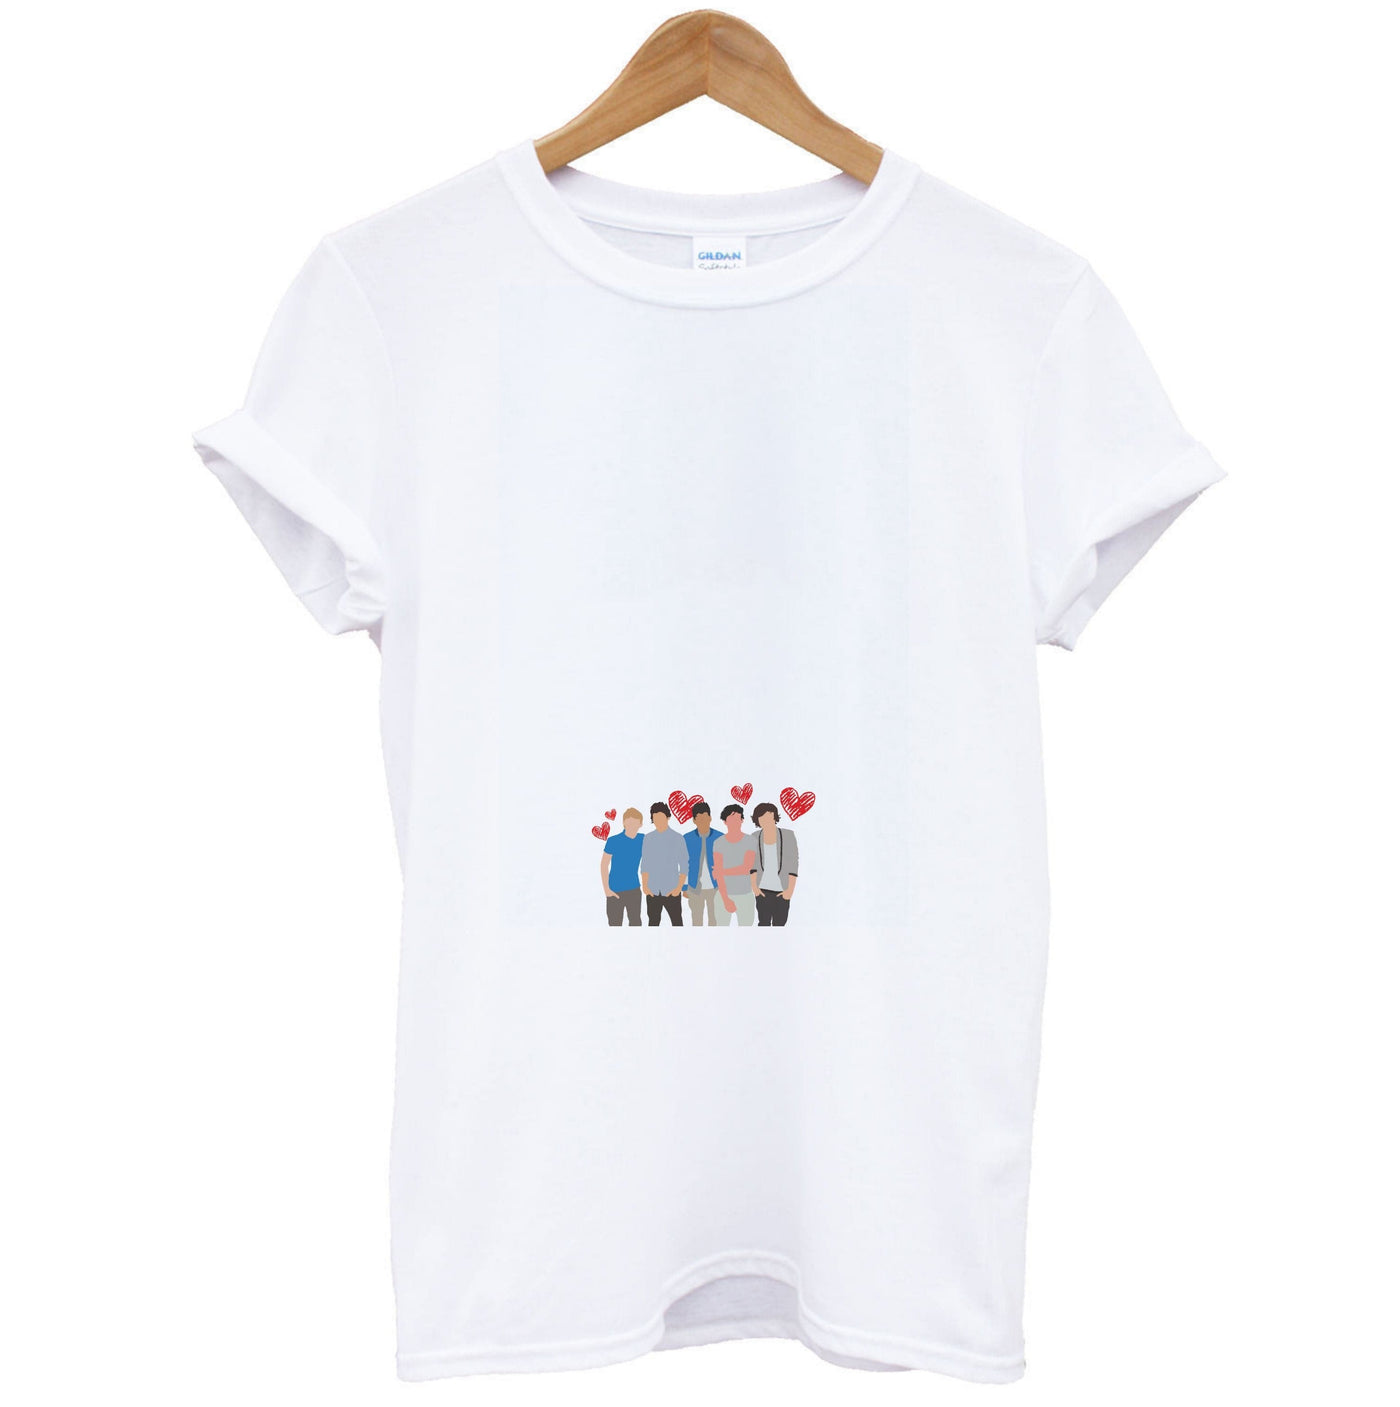 Love Band - One Direction T-Shirt